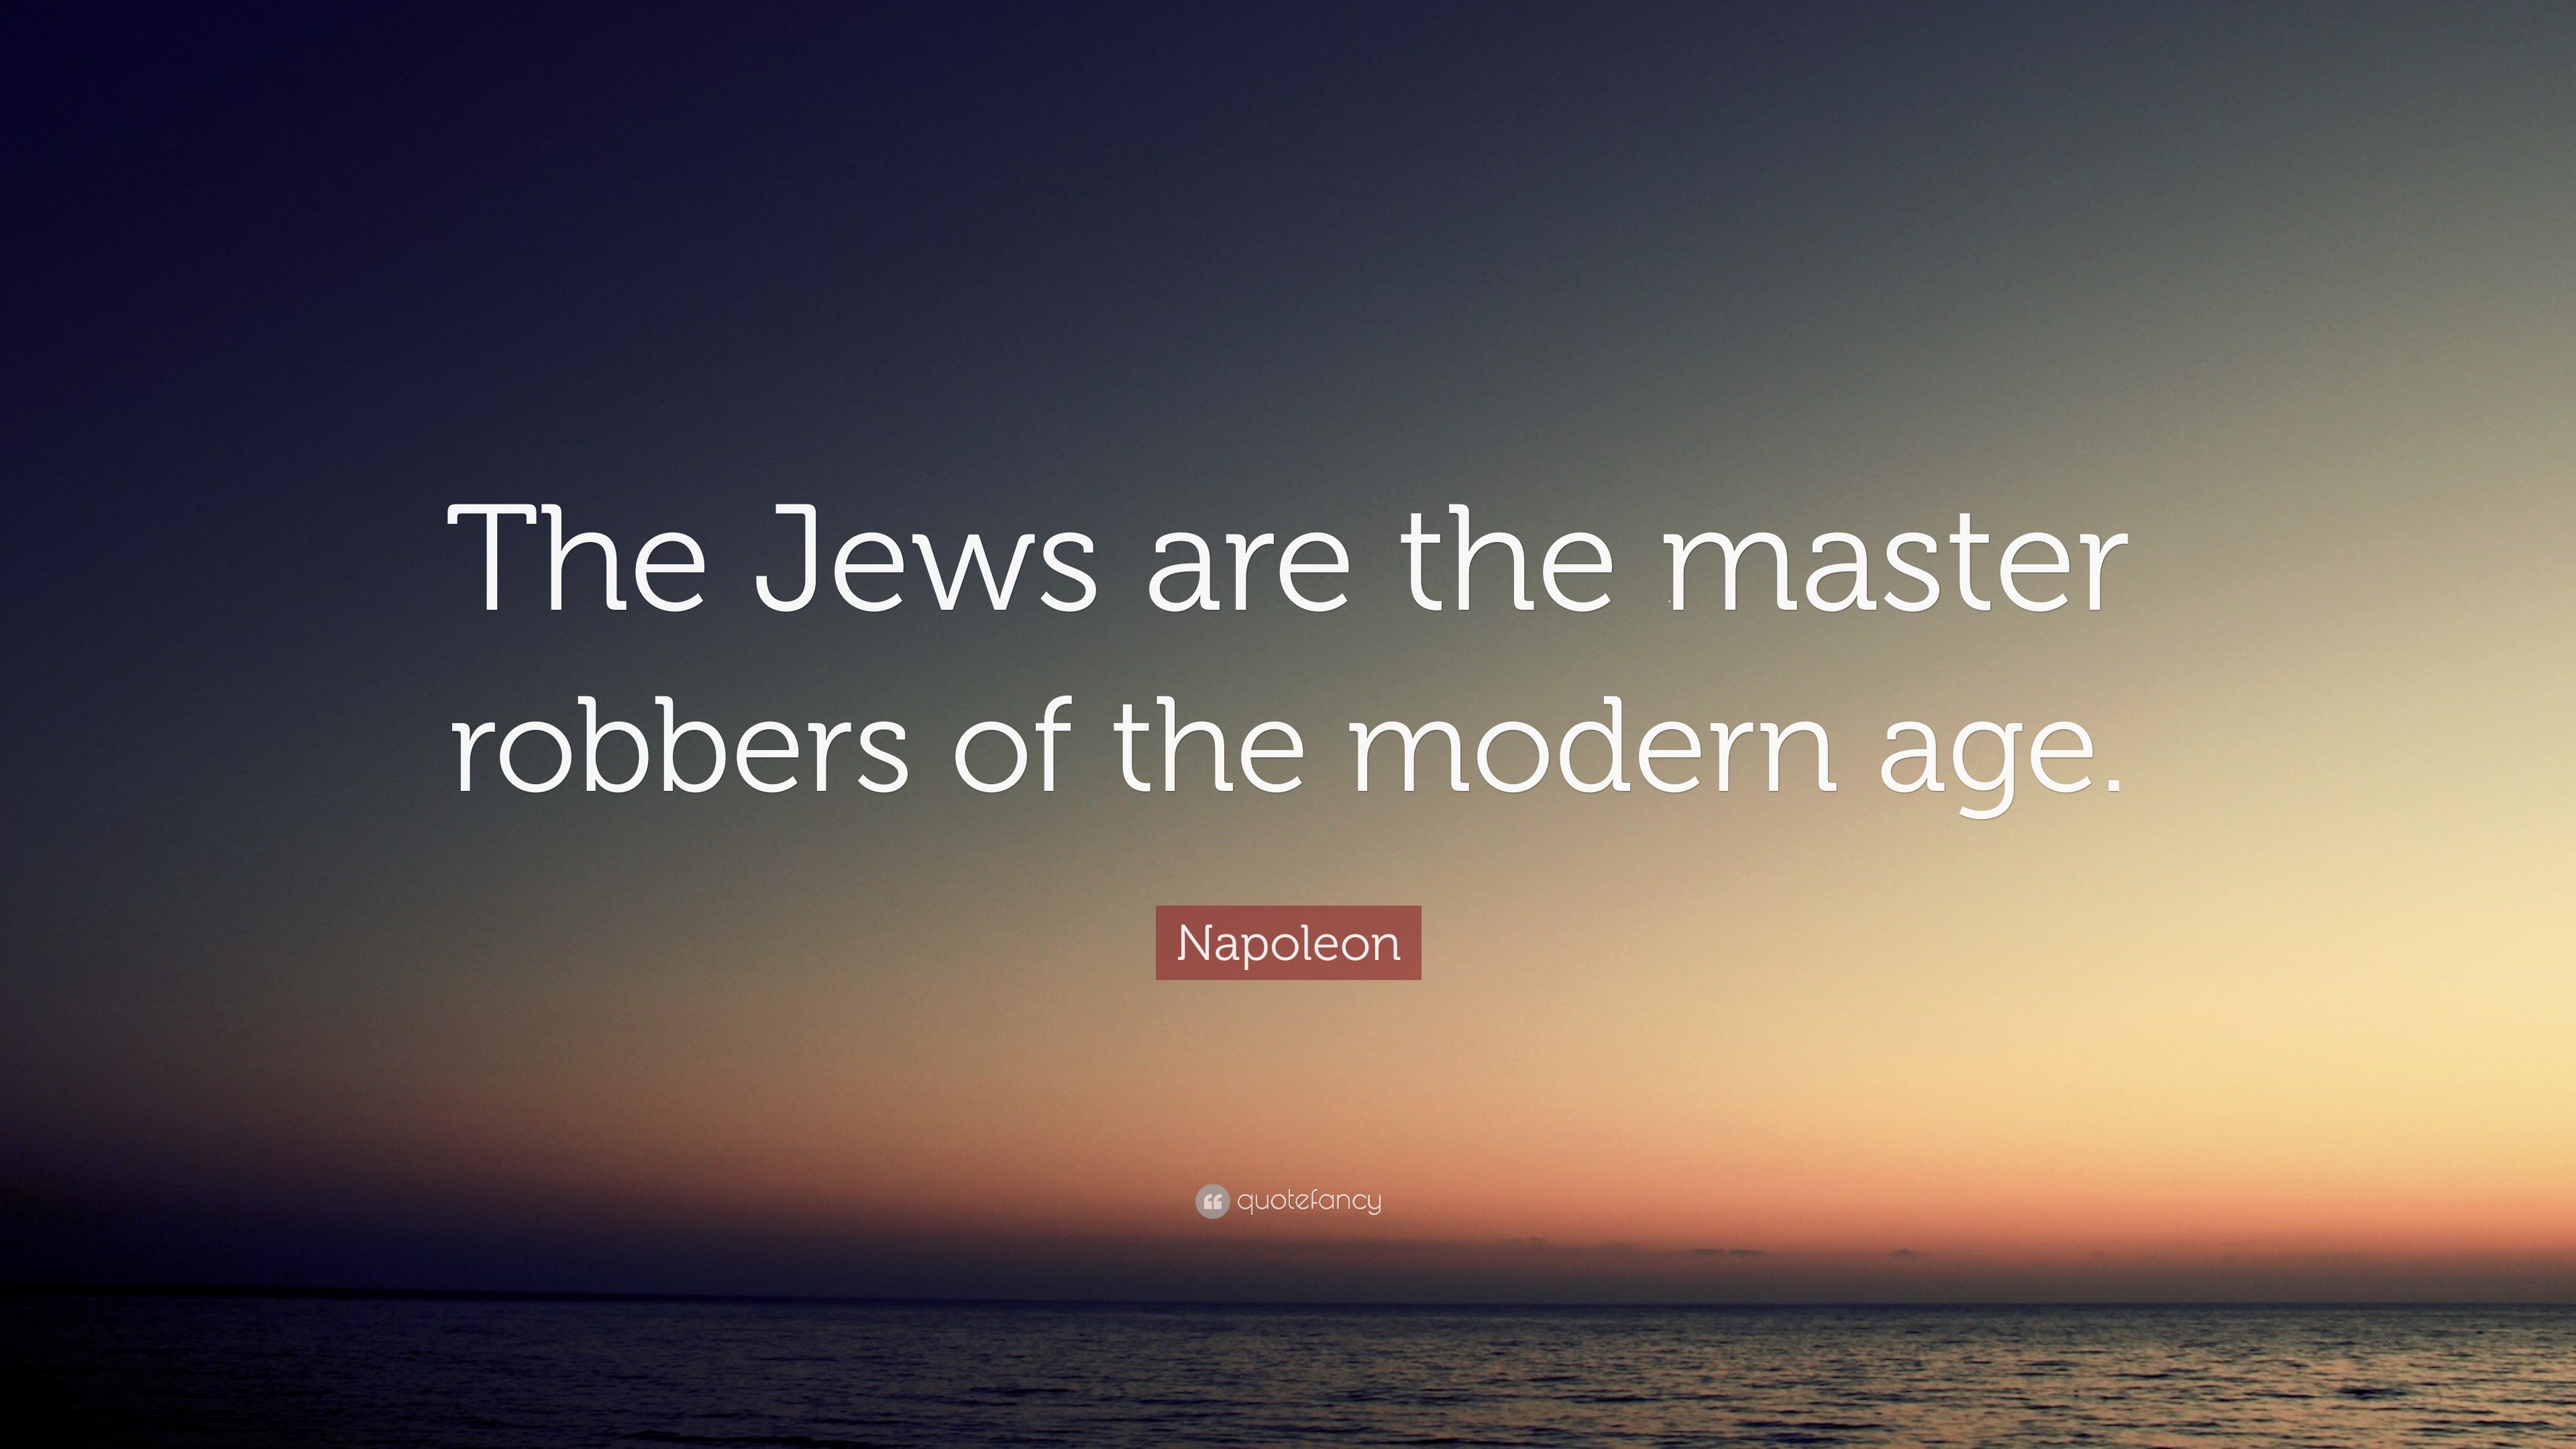 Napoleon Quote: “The Jews are the master robbers of the modern age.”